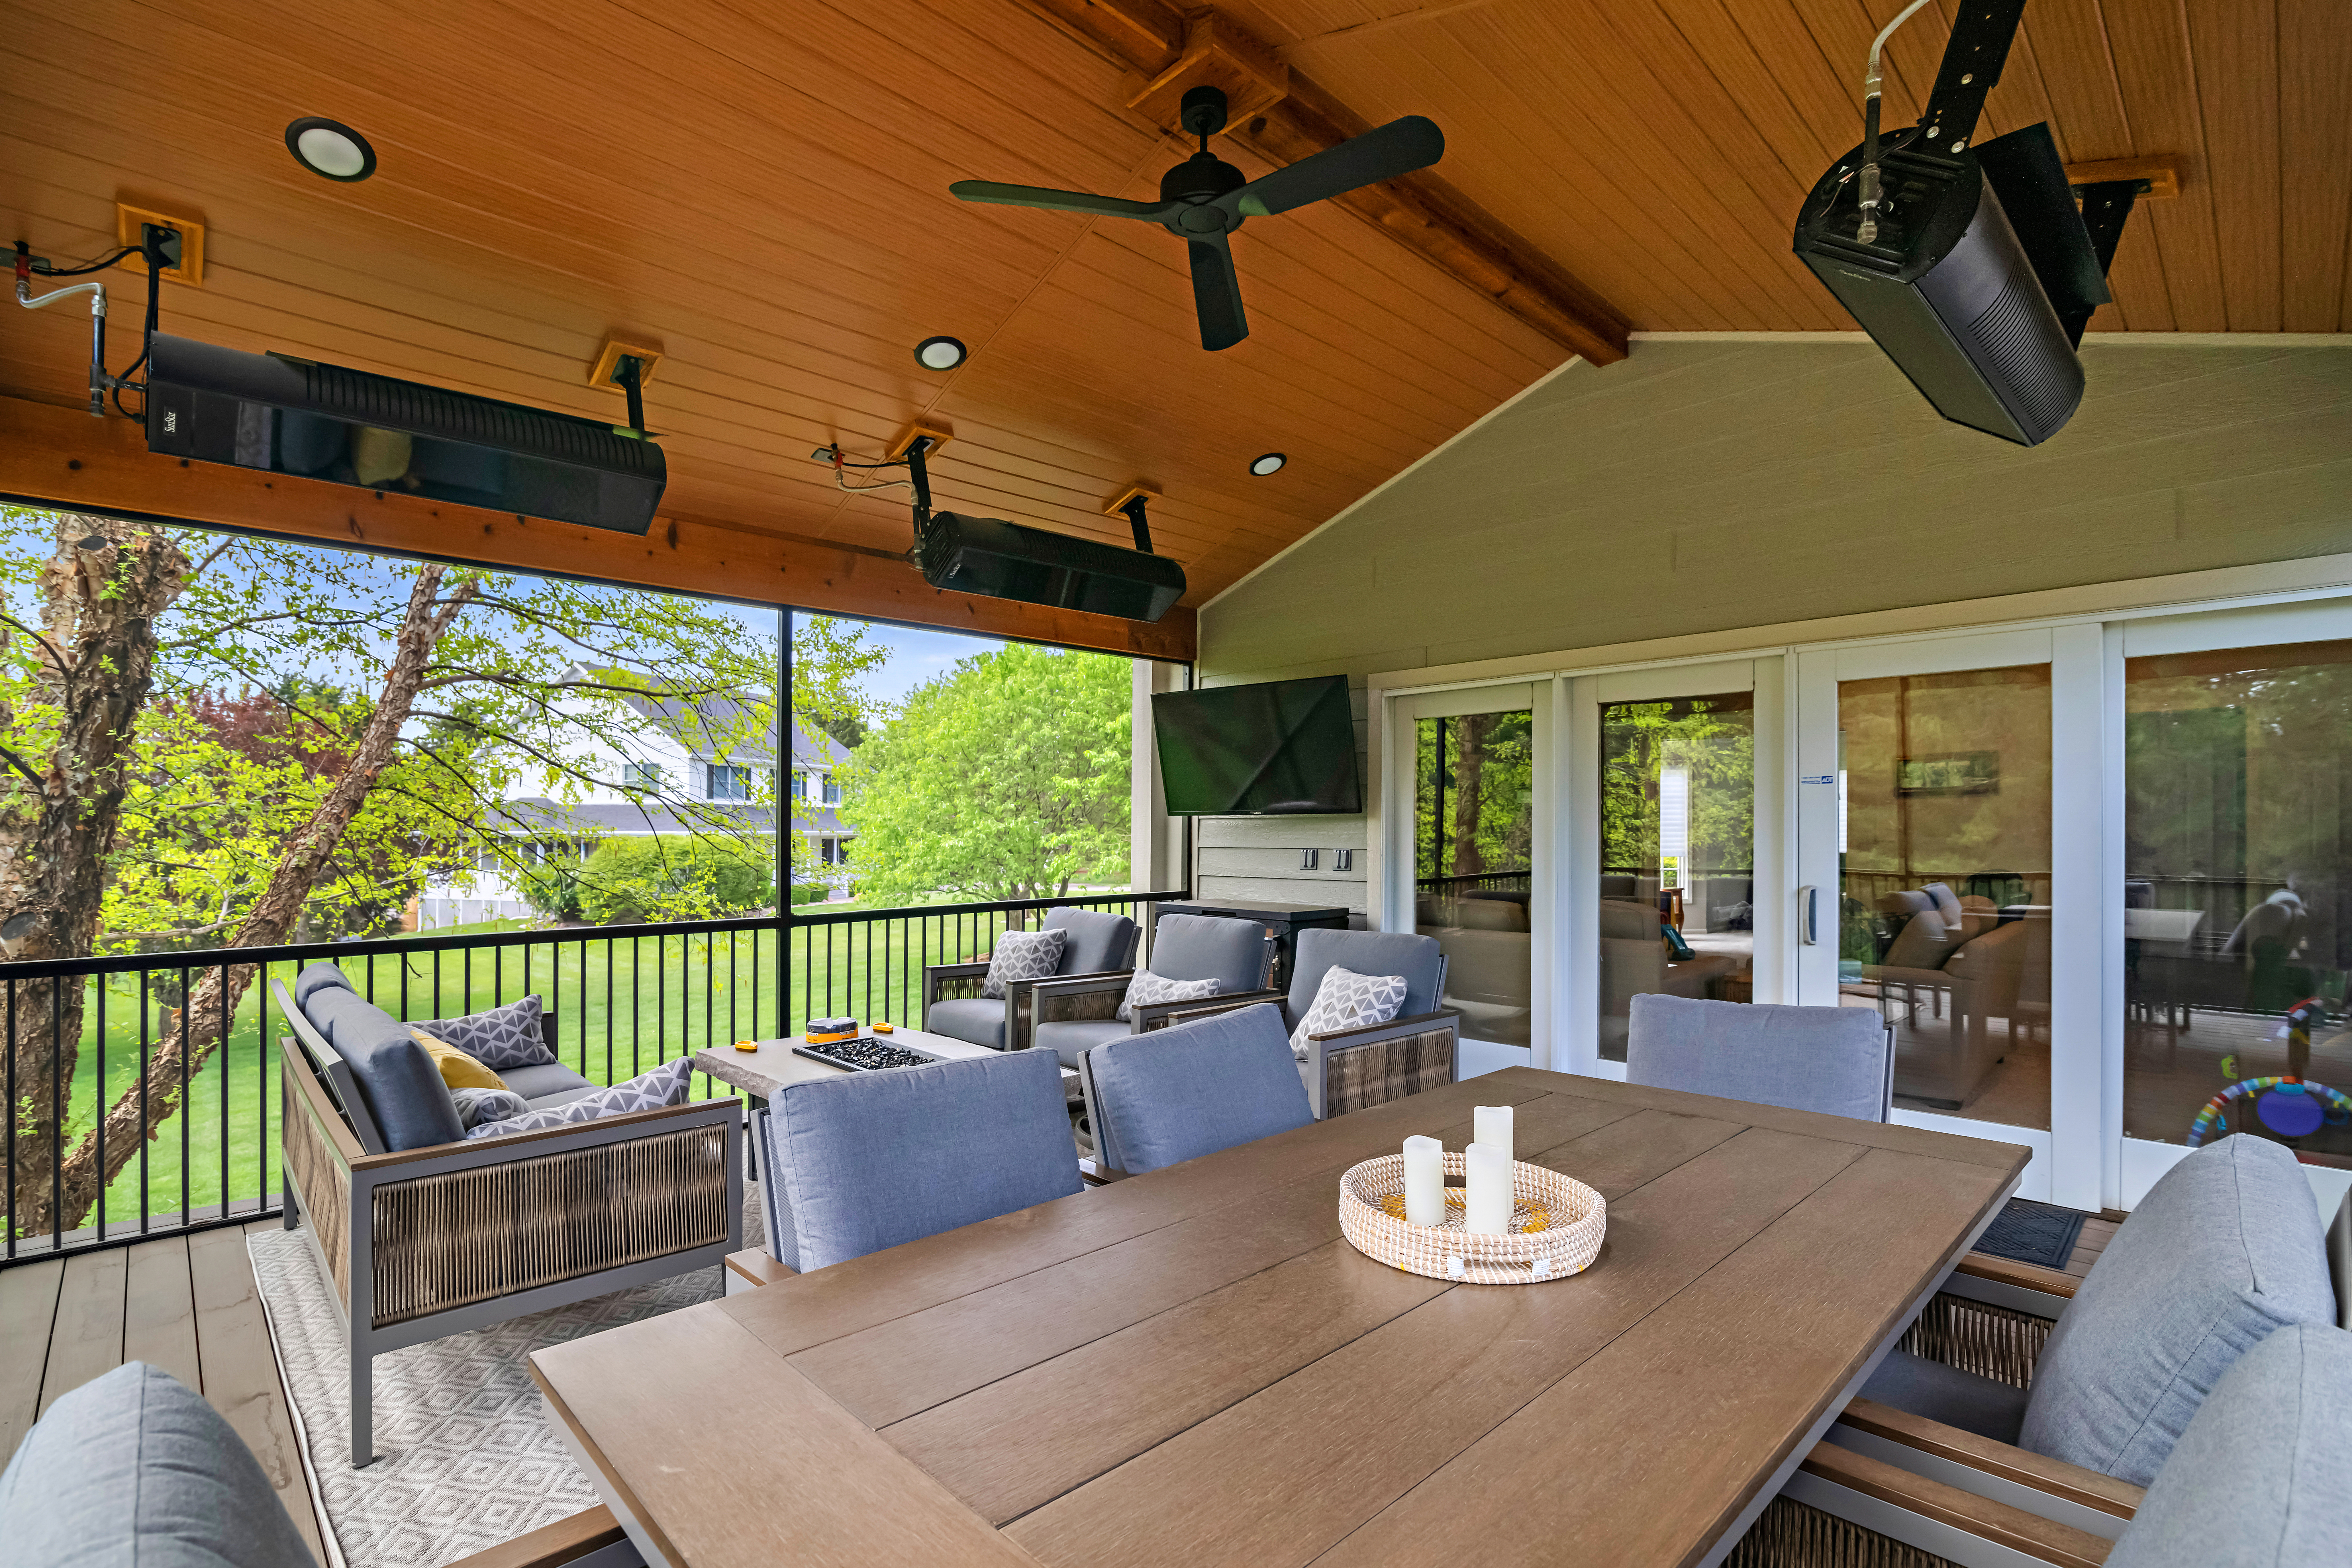 home remodel in manhattan kansas showing sunroom with wood ceiling and patio furniture